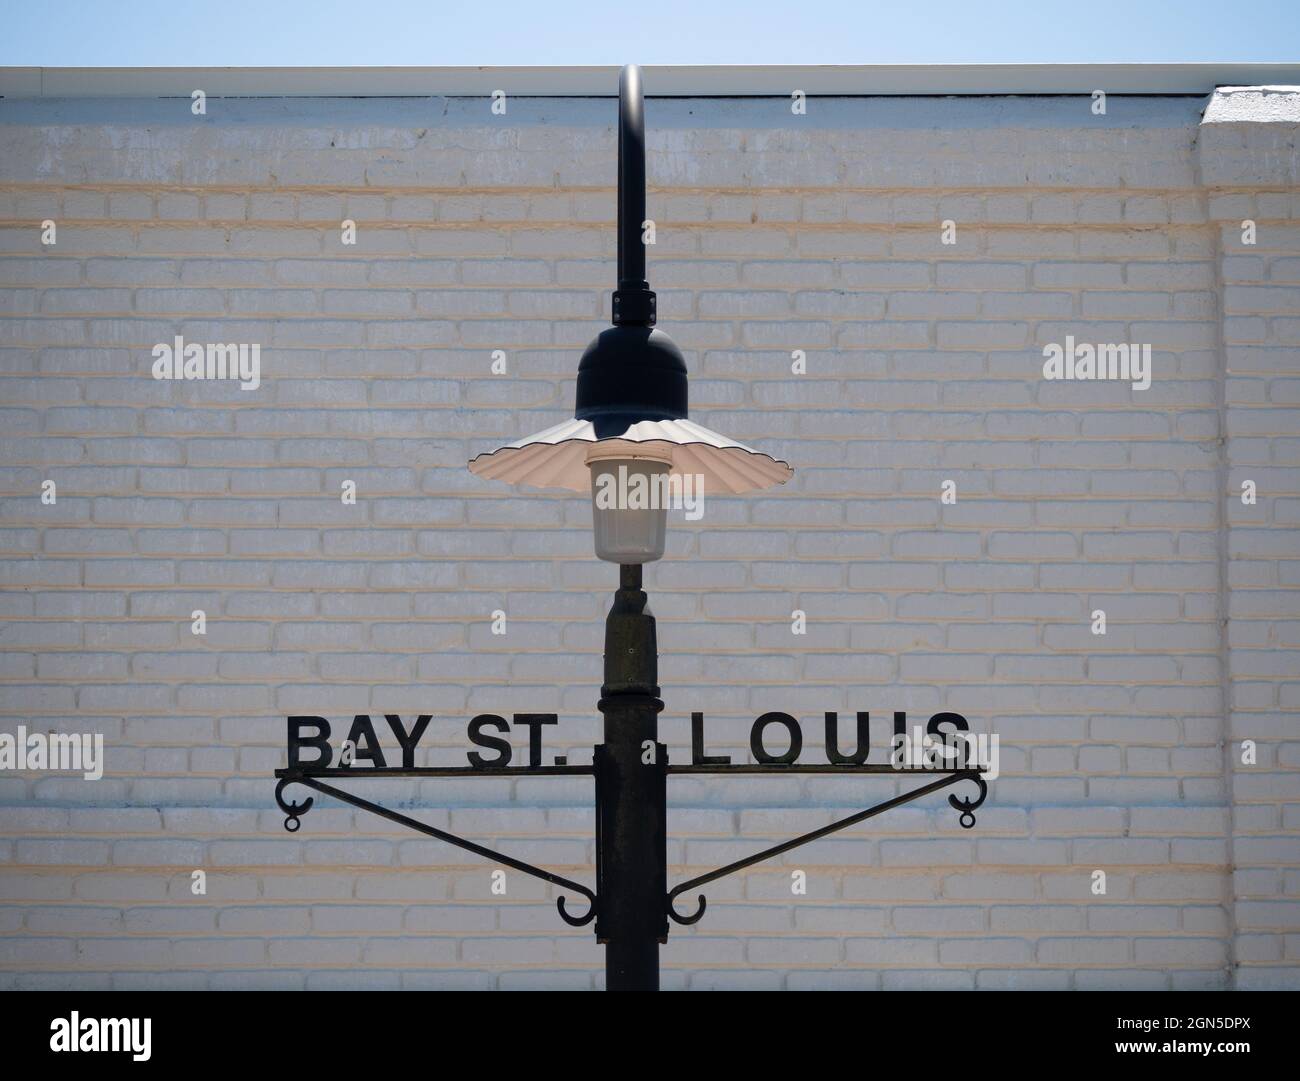 Old fashioned style street lamp in Bay St. Louis, Mississippi photographed with a white brick wall in the background. Stock Photo